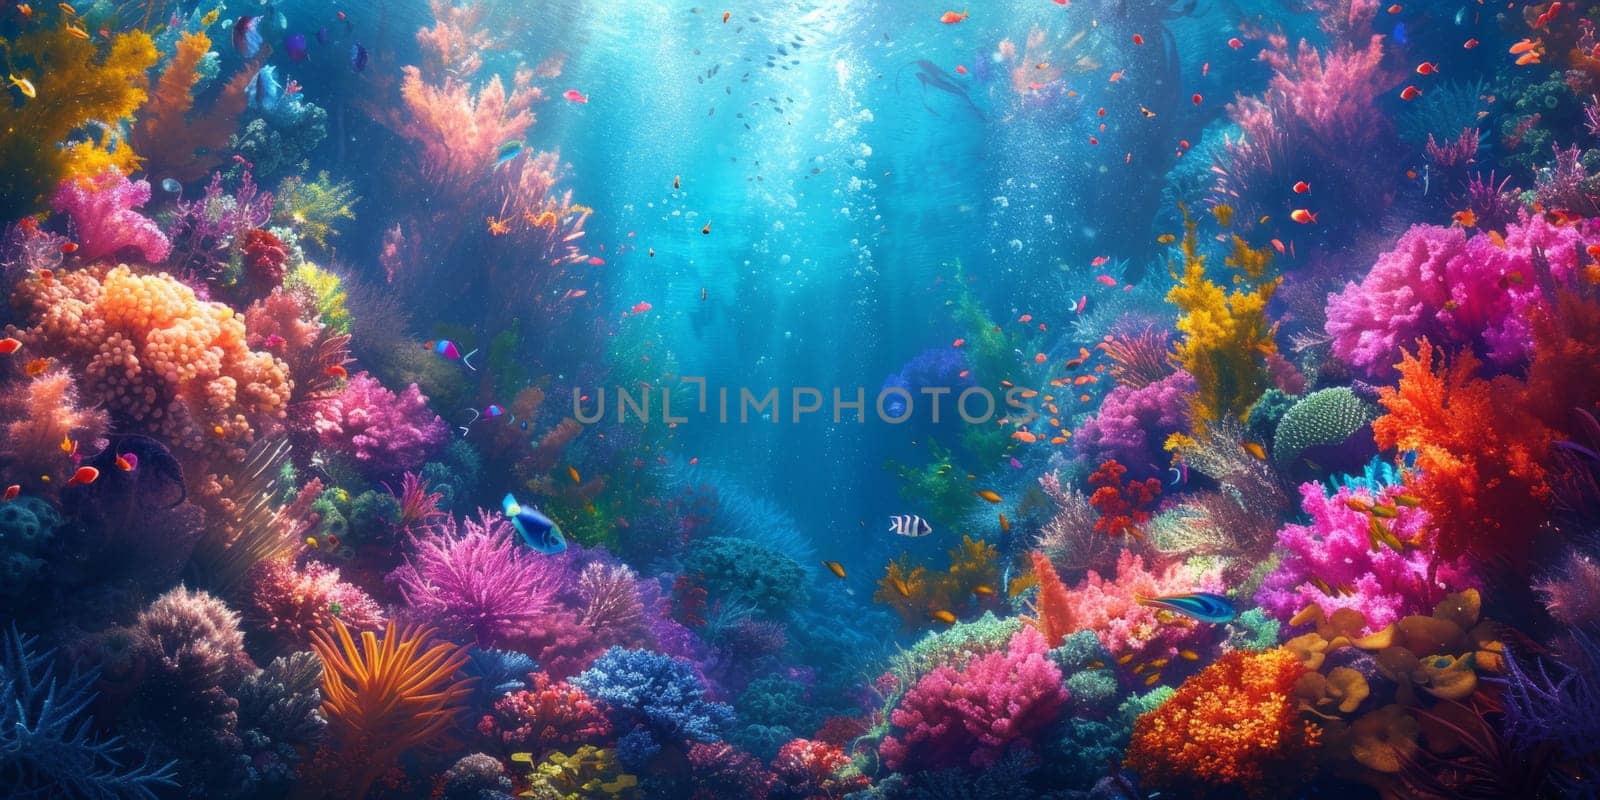 A colorful underwater scene with many different types of coral, AI by starush